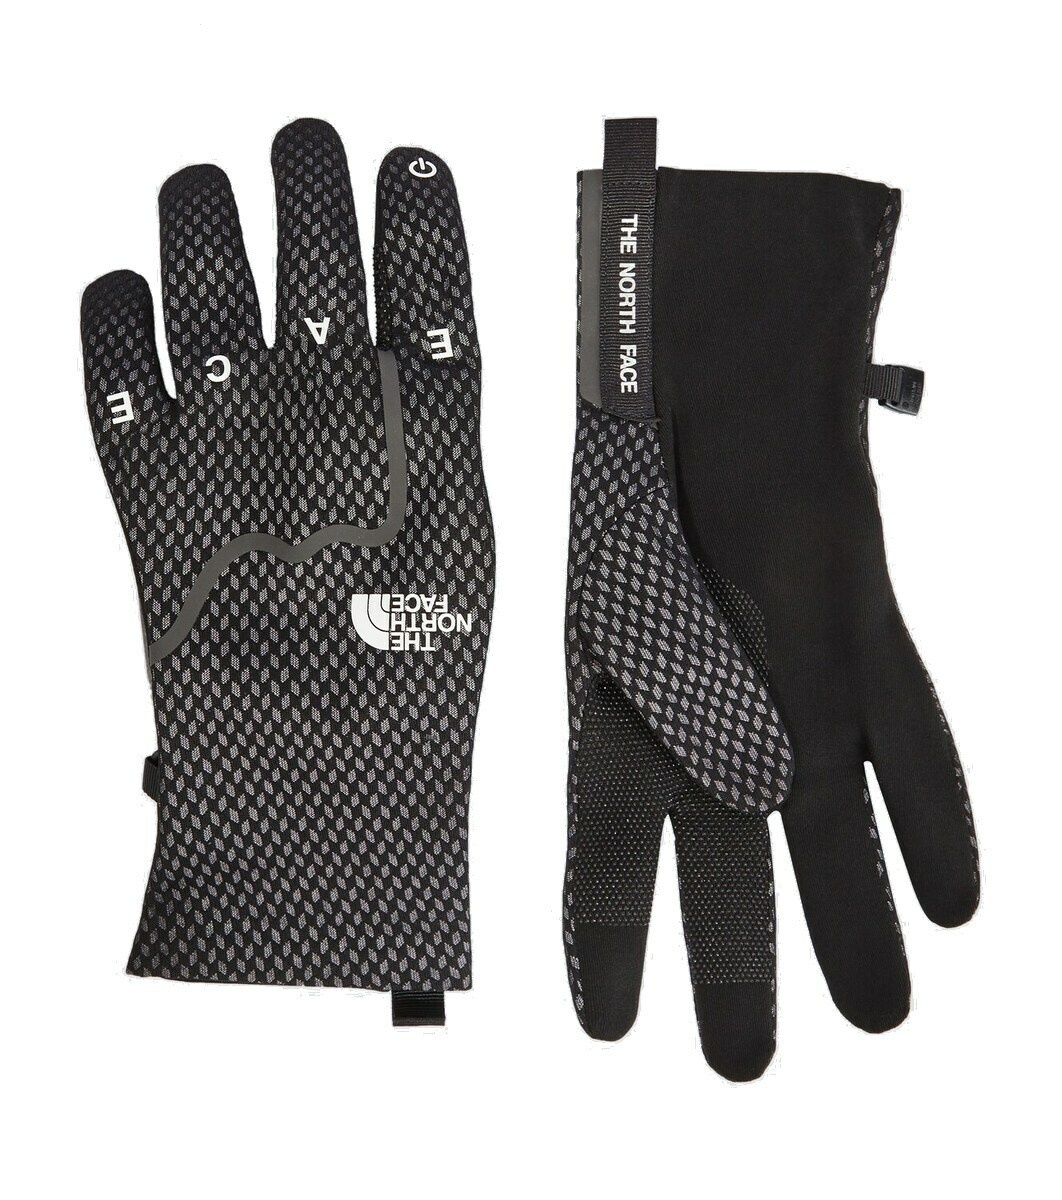 Photo: The North Face x Undercover gloves